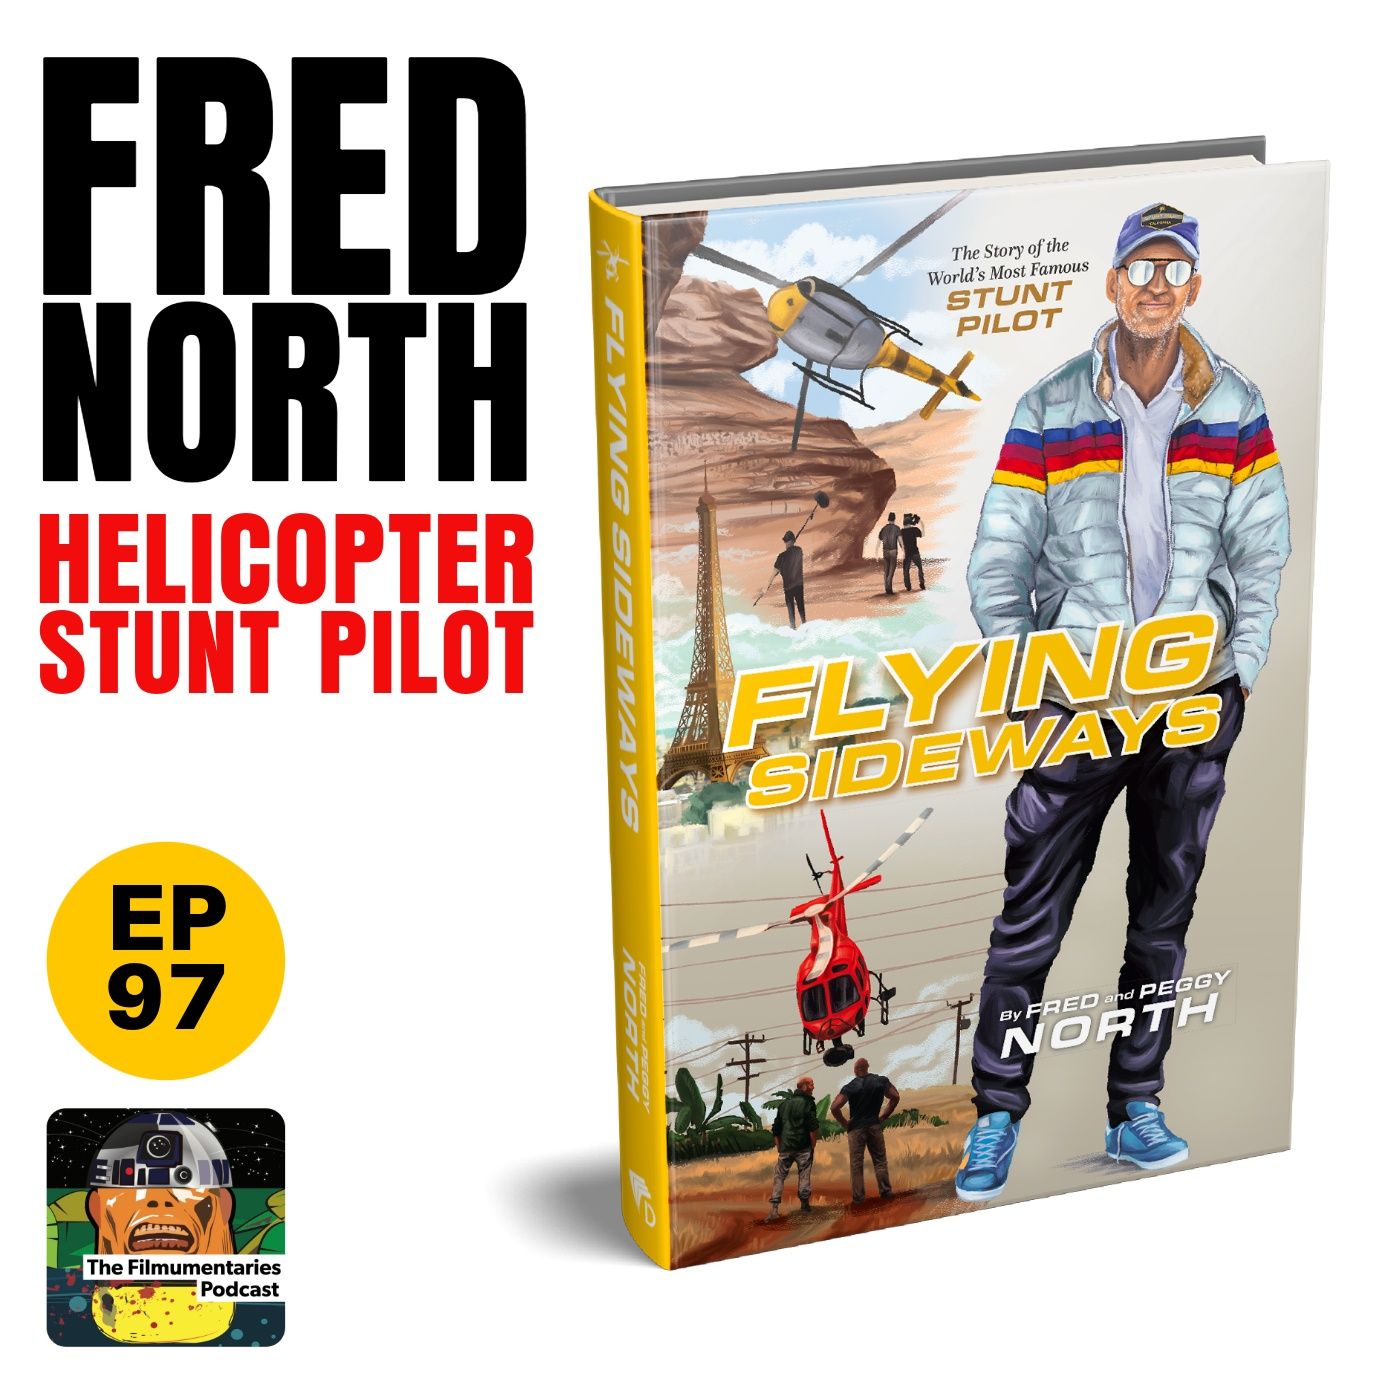 97 - Fred North - Helicopter Stunt Pilot - "Flying Sideways"